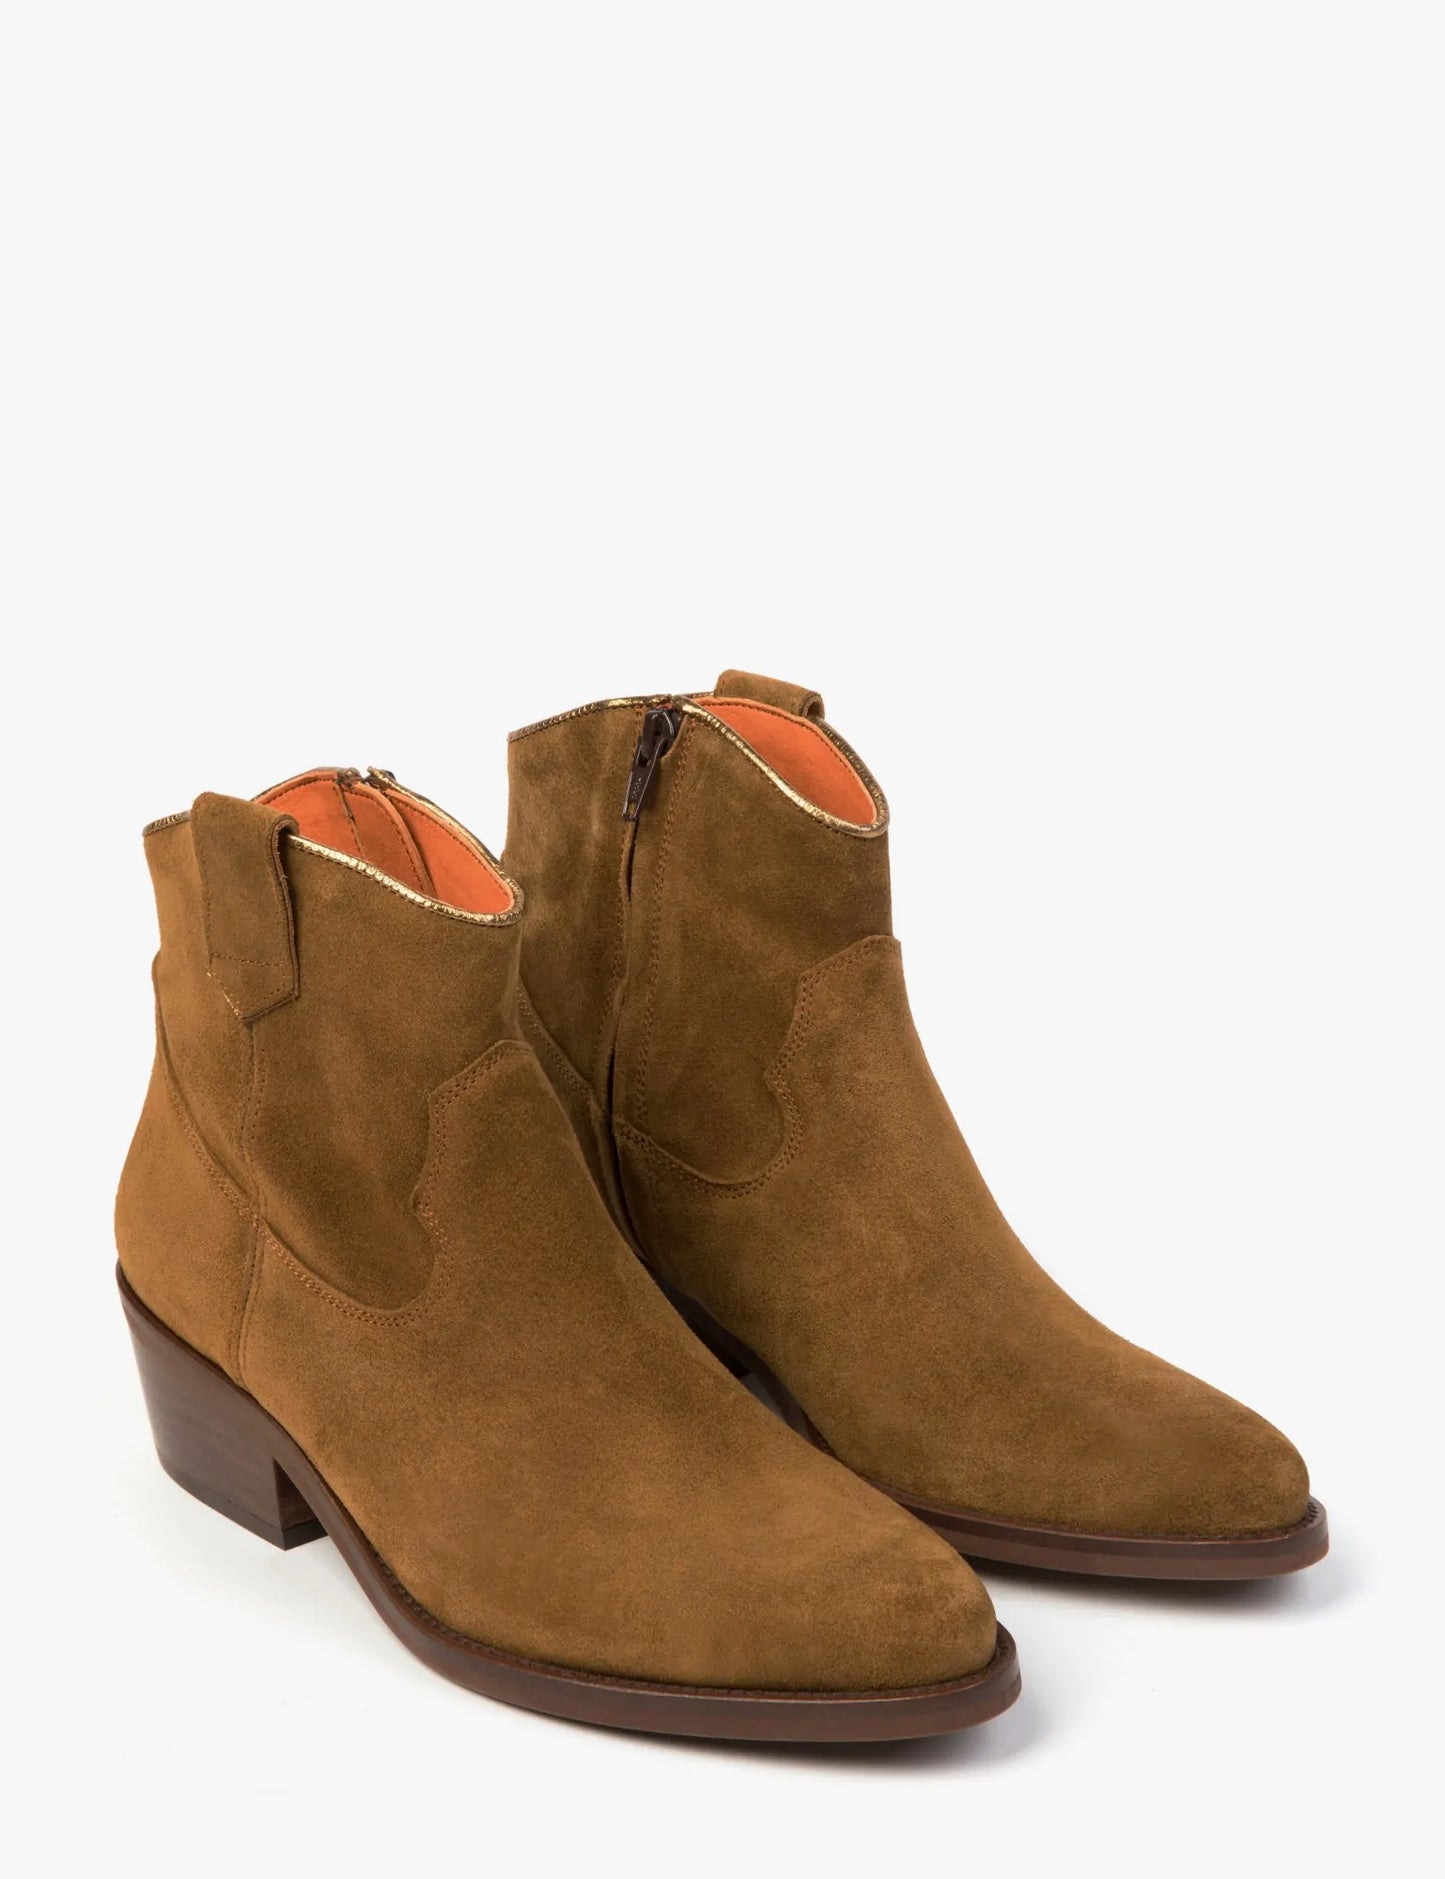 Penelope Chilvers the Cassidy Suede